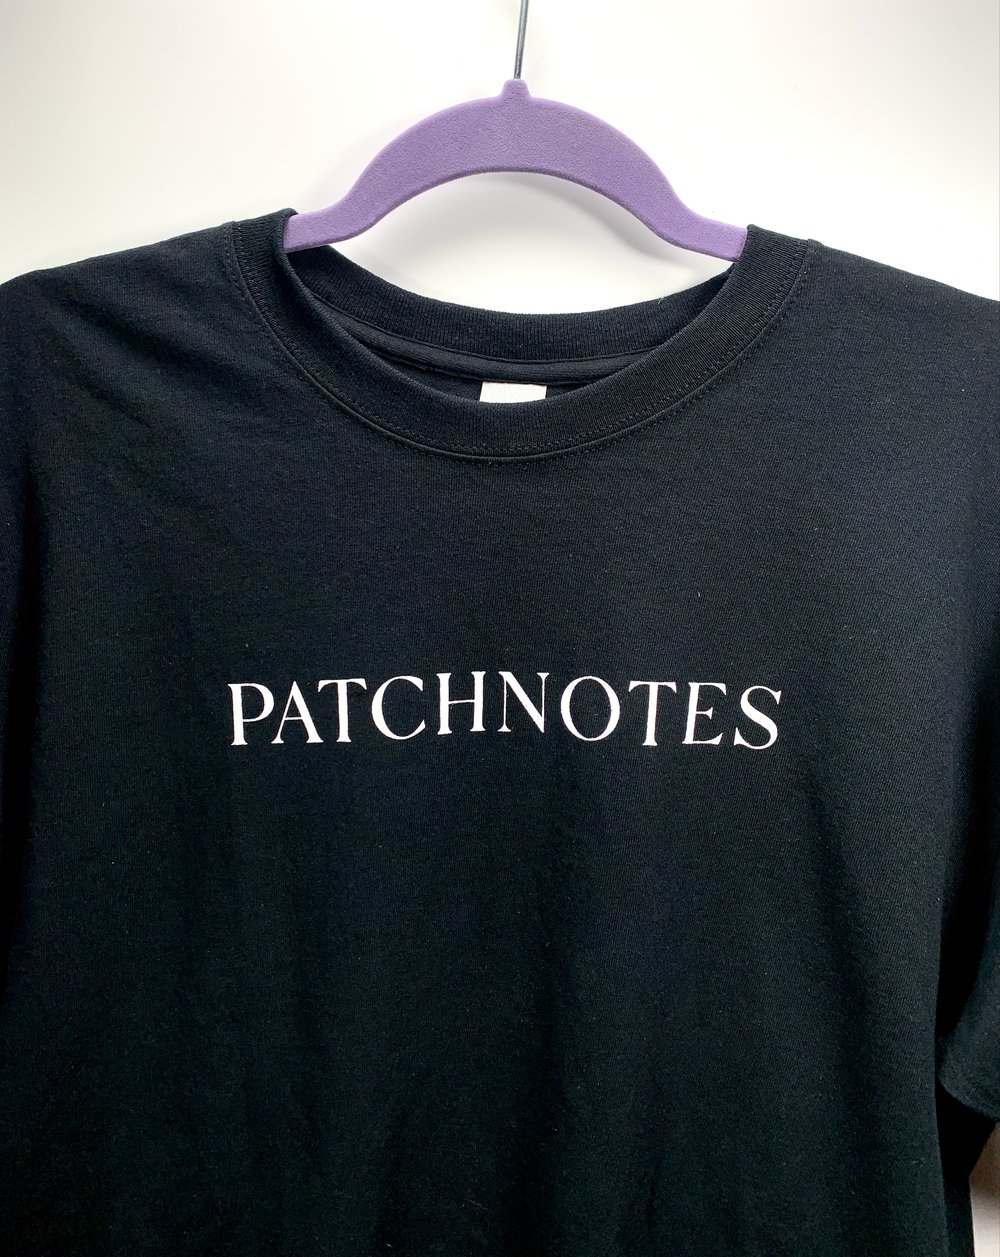 Image of patchnotes T-Shirt - "Fold Your Hands Into Mine."